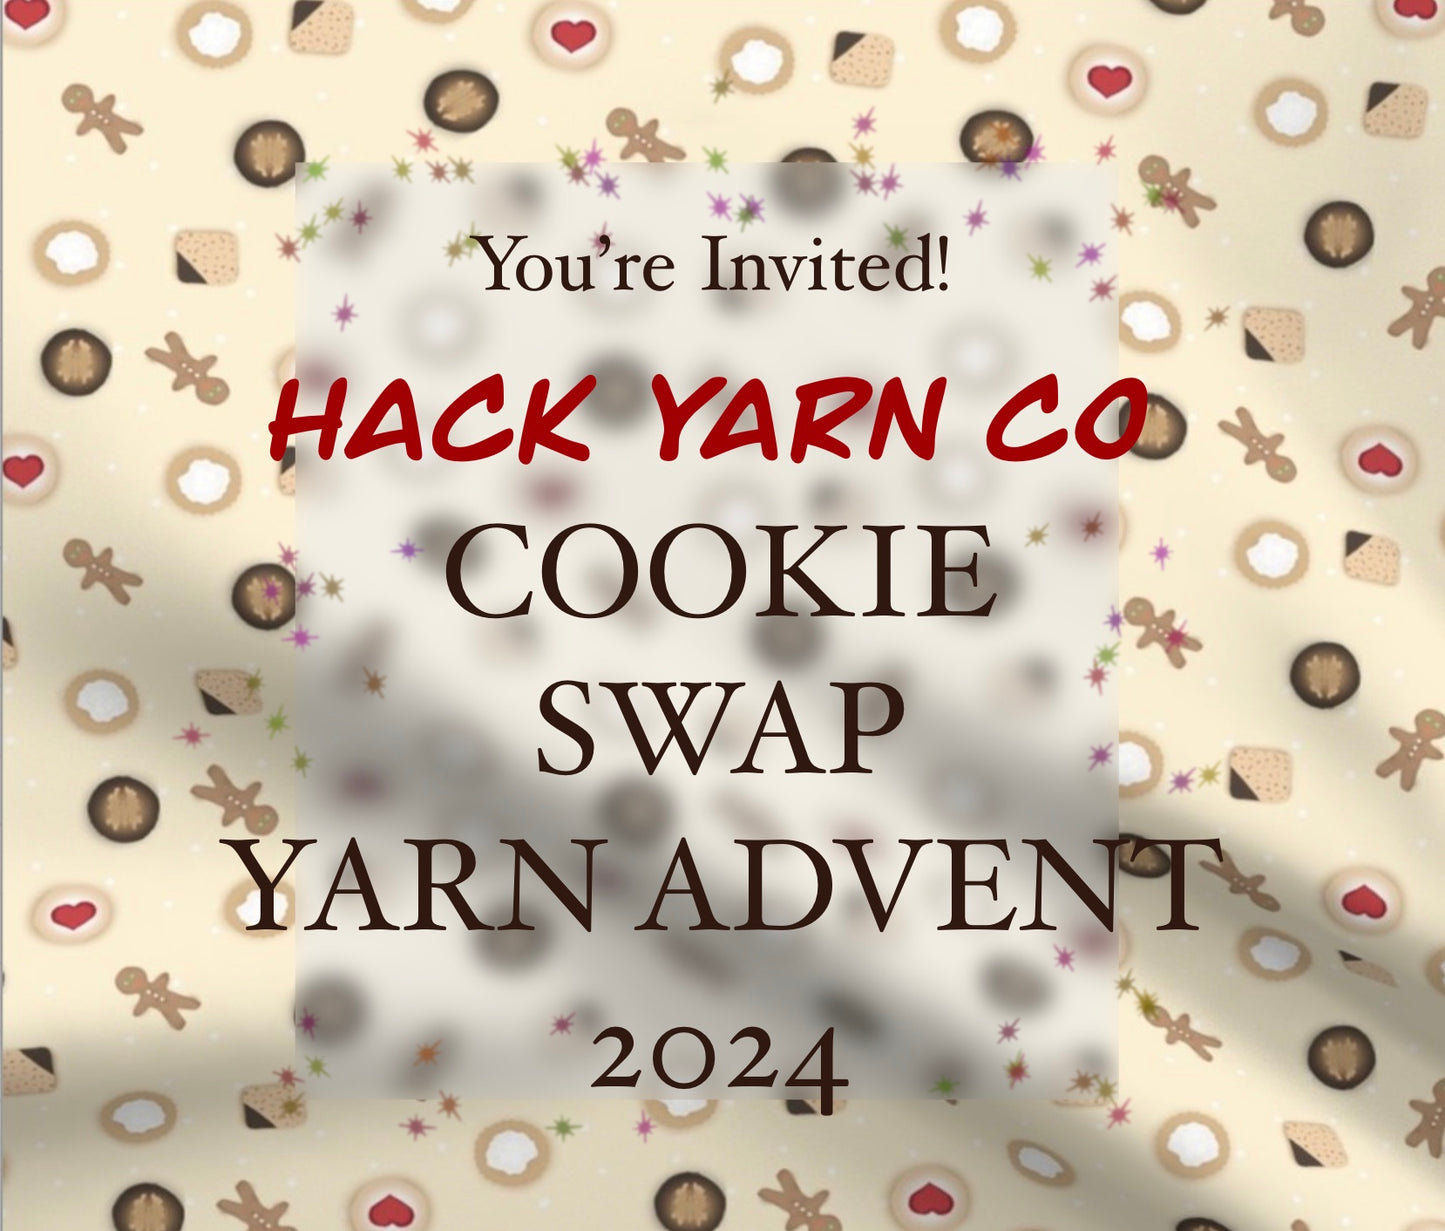 HYCo ‘Cookie Swap’ Yarn Advent 2024